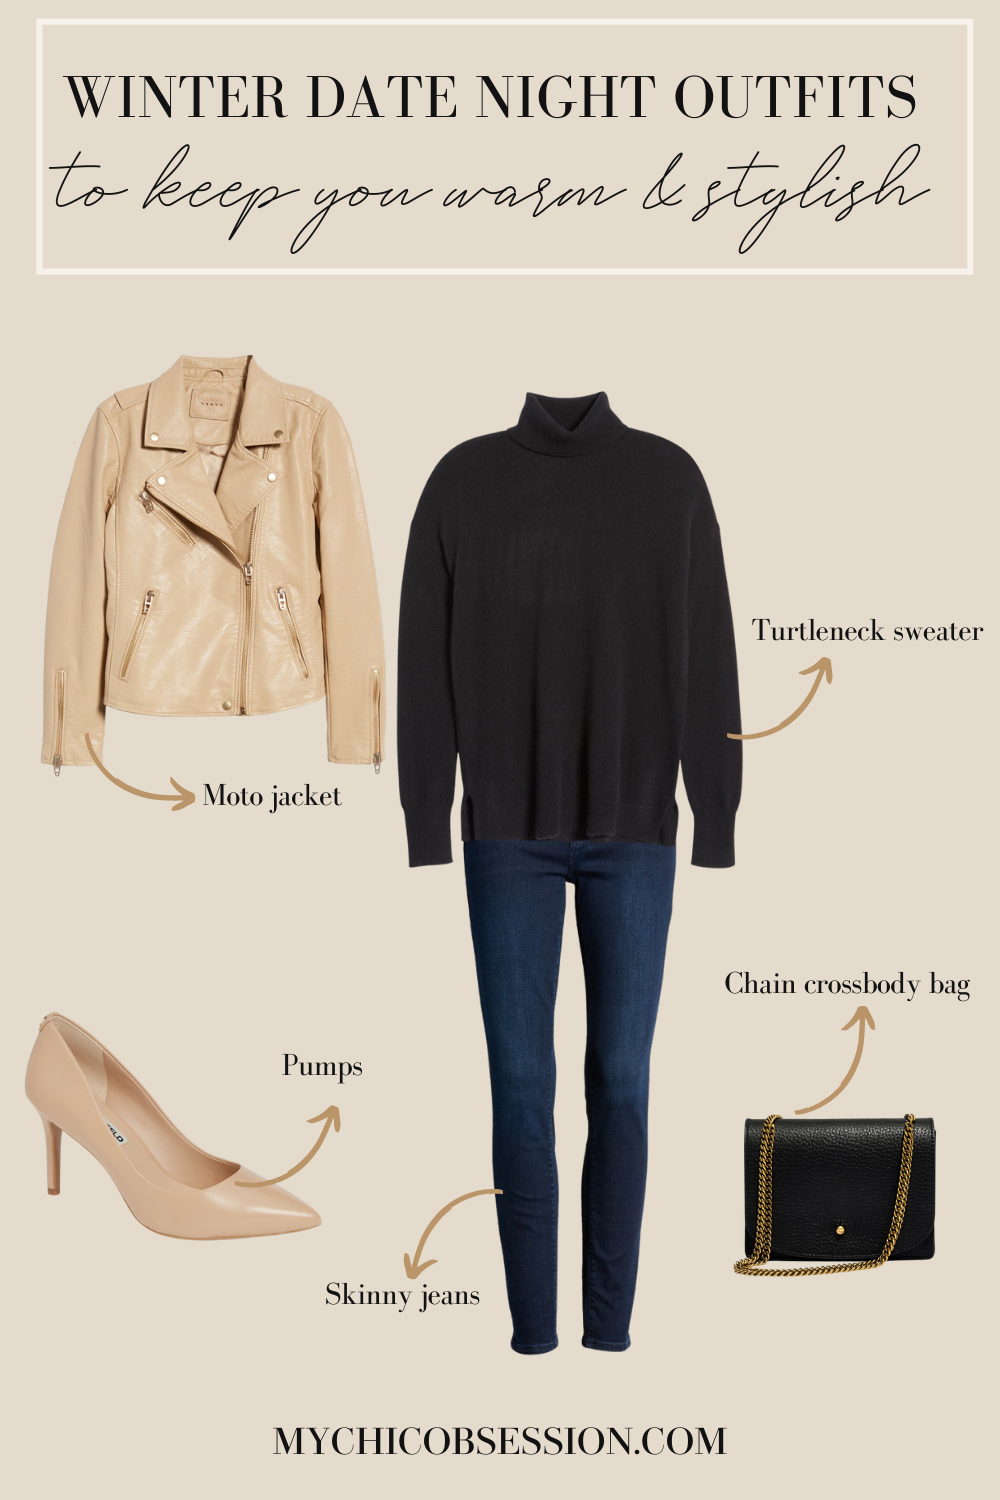 Winter date night look book with moto jacket